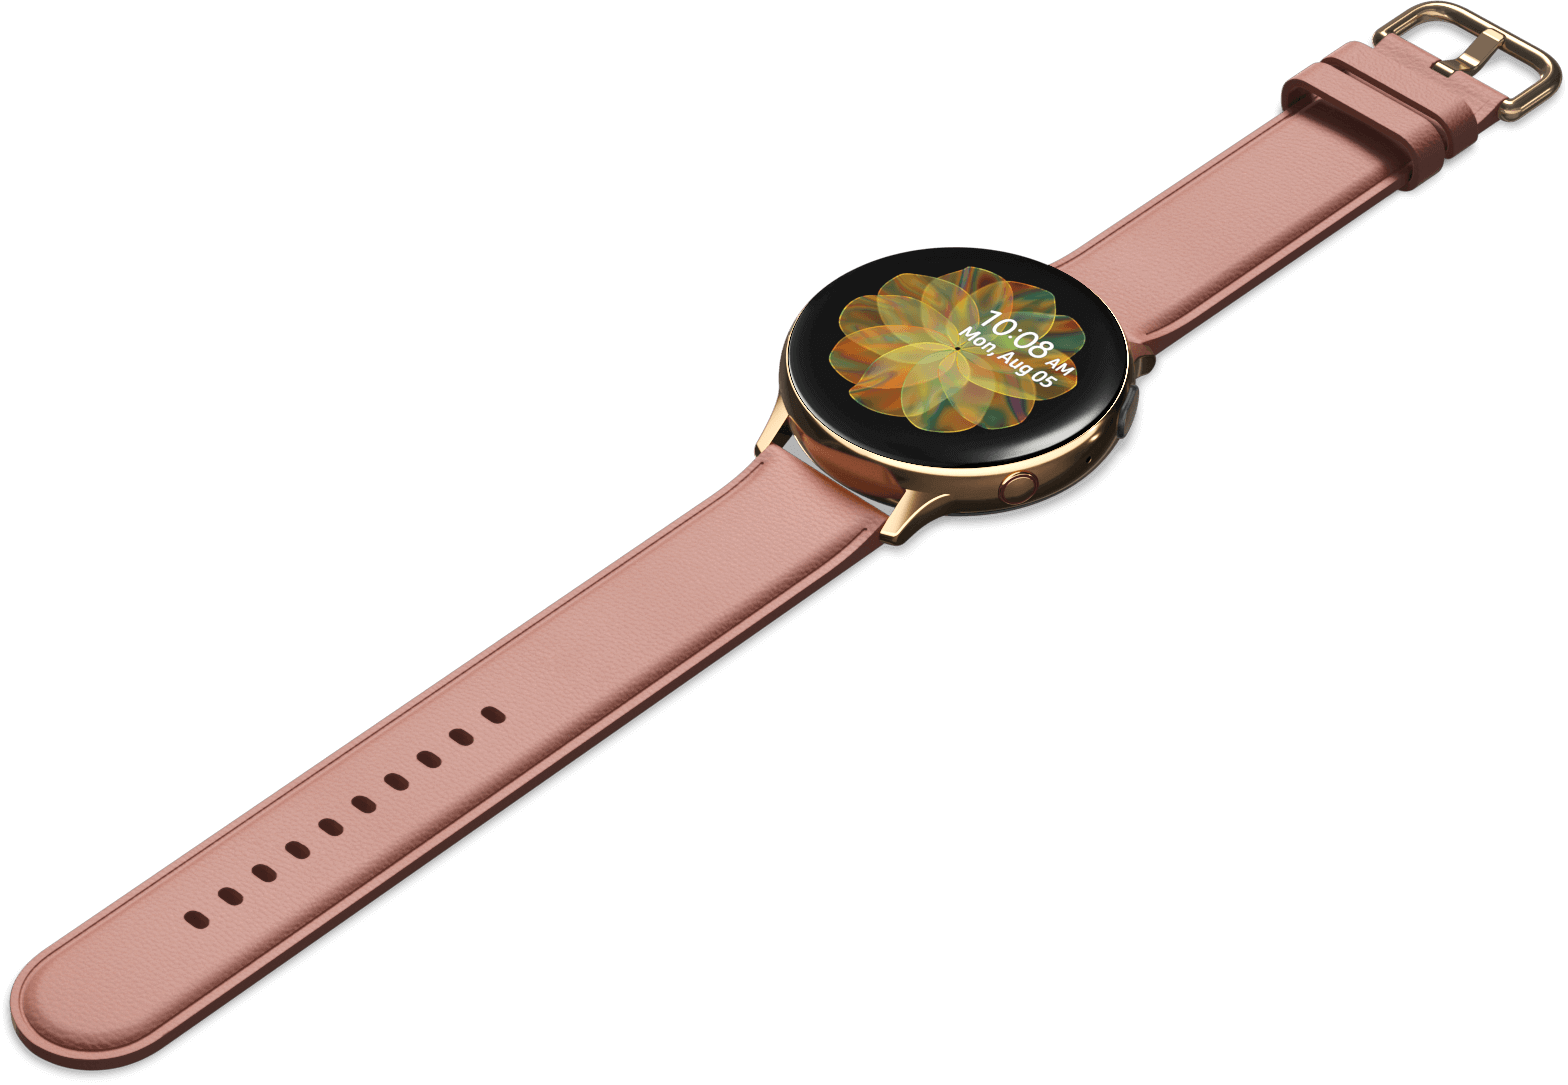 Black Samsung Galaxy Watch Active 2, 200grm at Rs 1450 in Ahmedabad